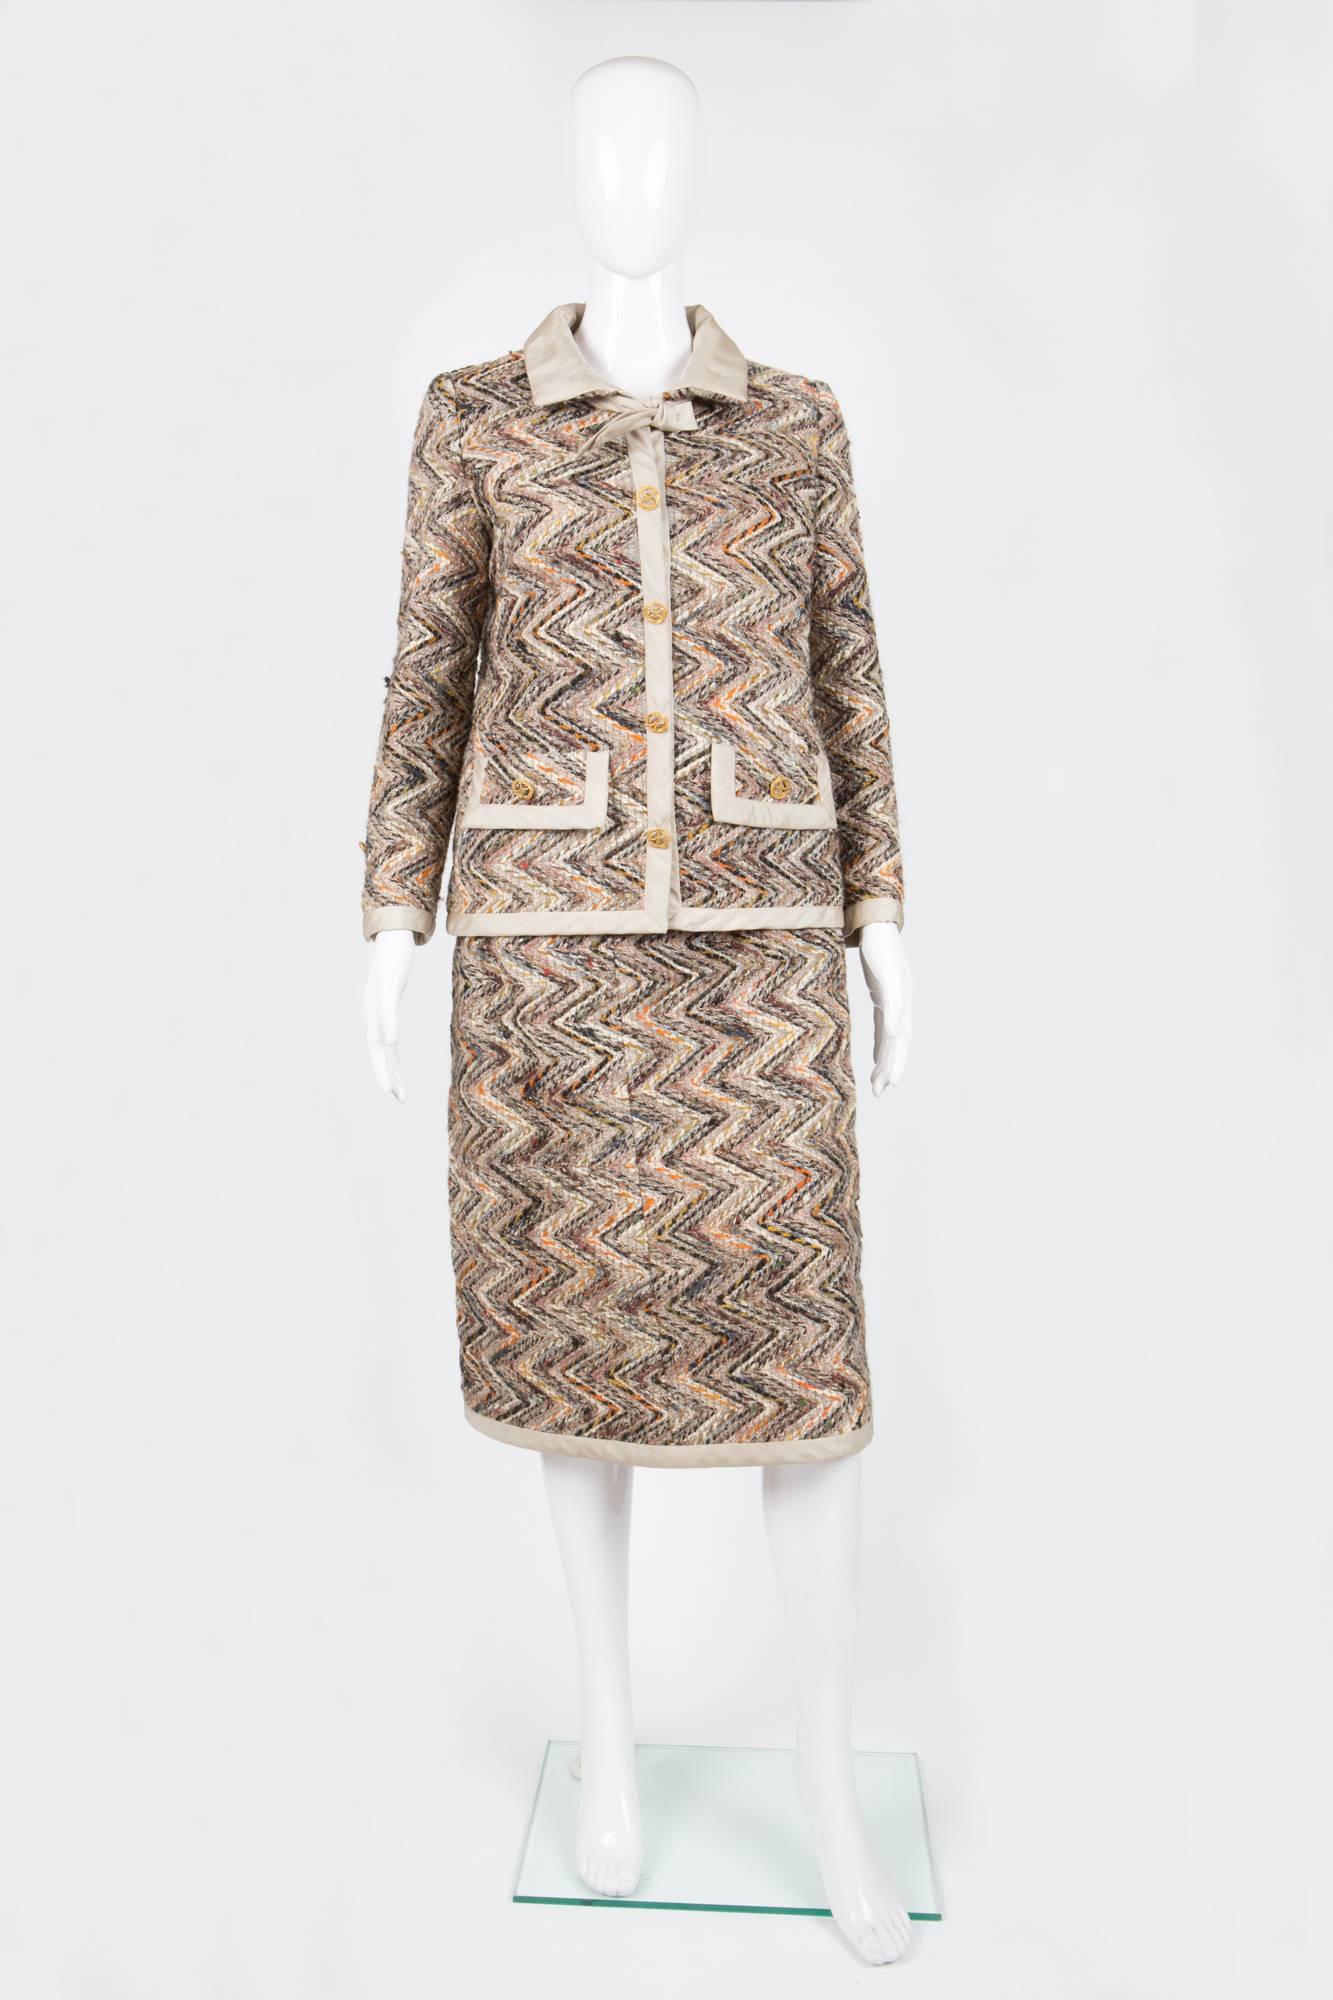 1960s rare Haute Couture Chanel tweed suit featuring a zebra wool tweed jacket  with light ivory silk details, decoratives gold tone buttons (with hidden silk recovered snaps), light orange silk lining, a matching wool & silk skirt. 
In good vintage